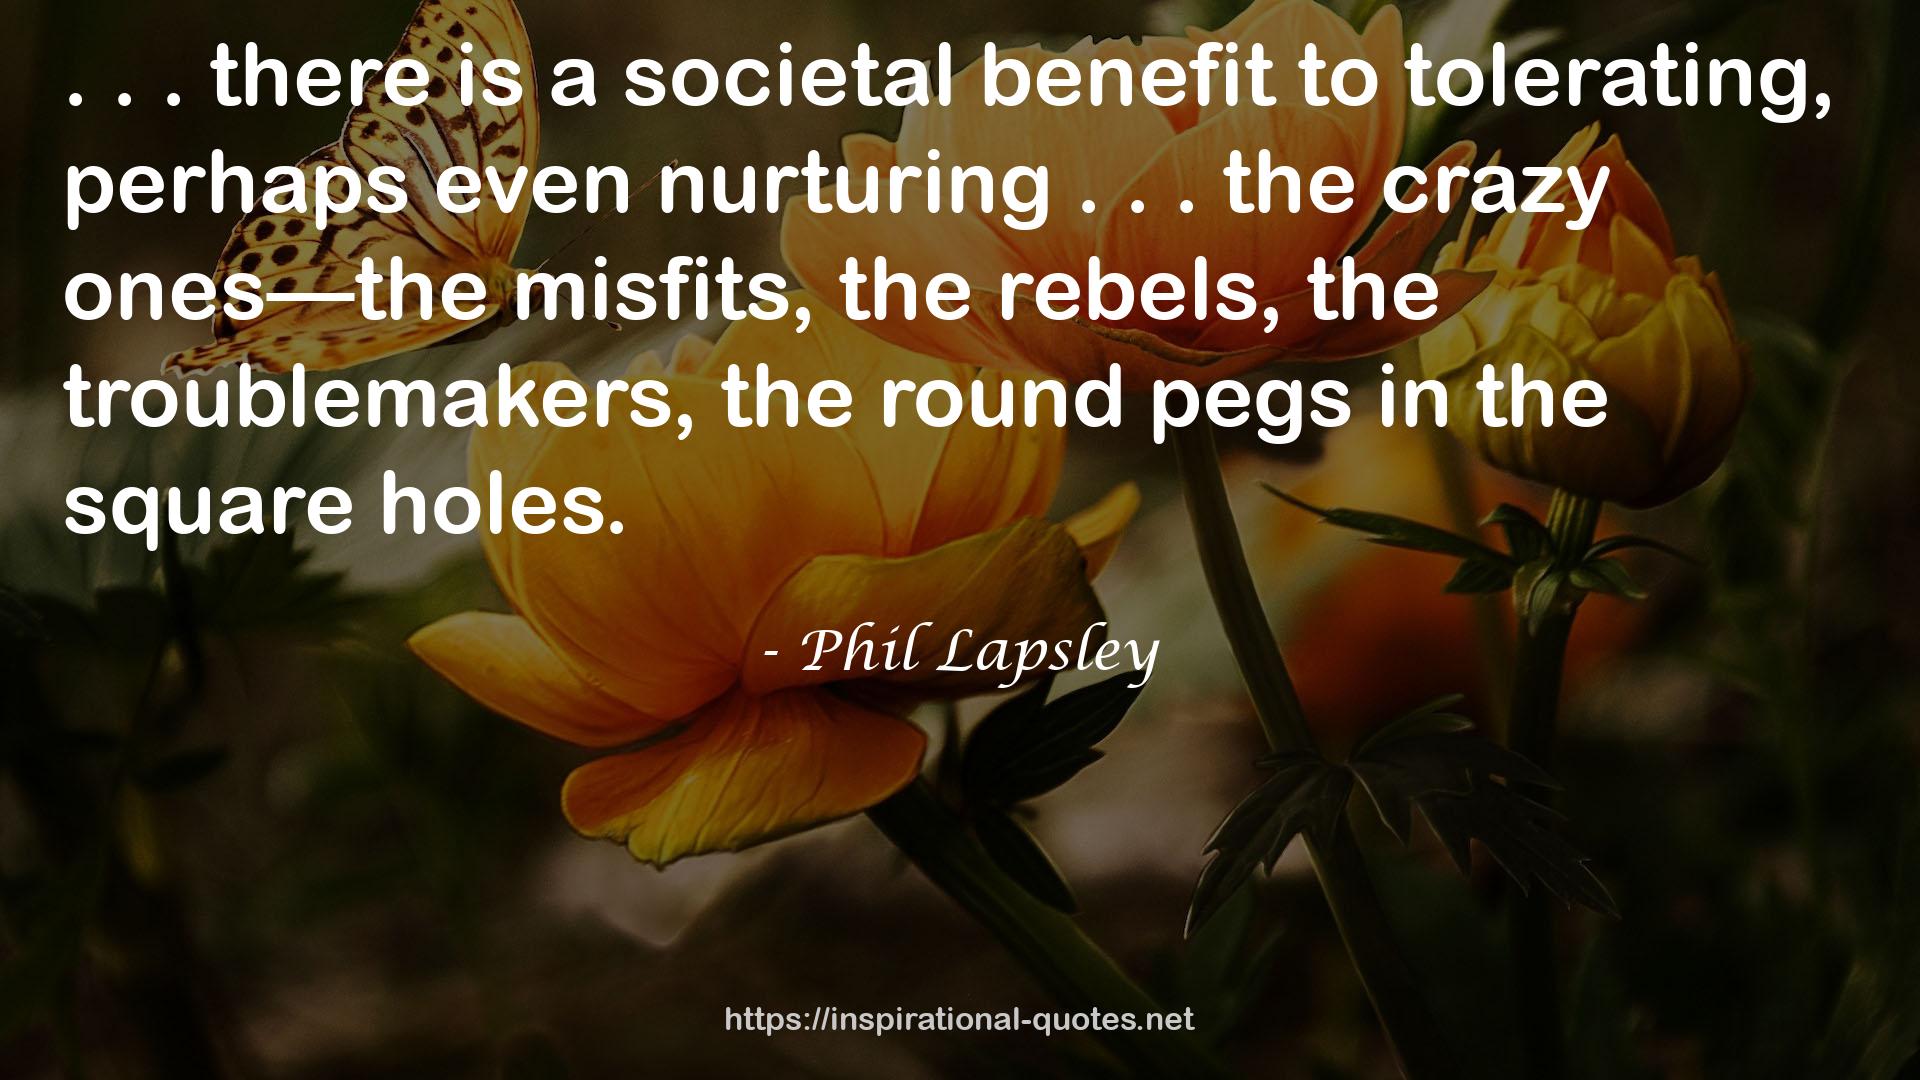 Phil Lapsley QUOTES